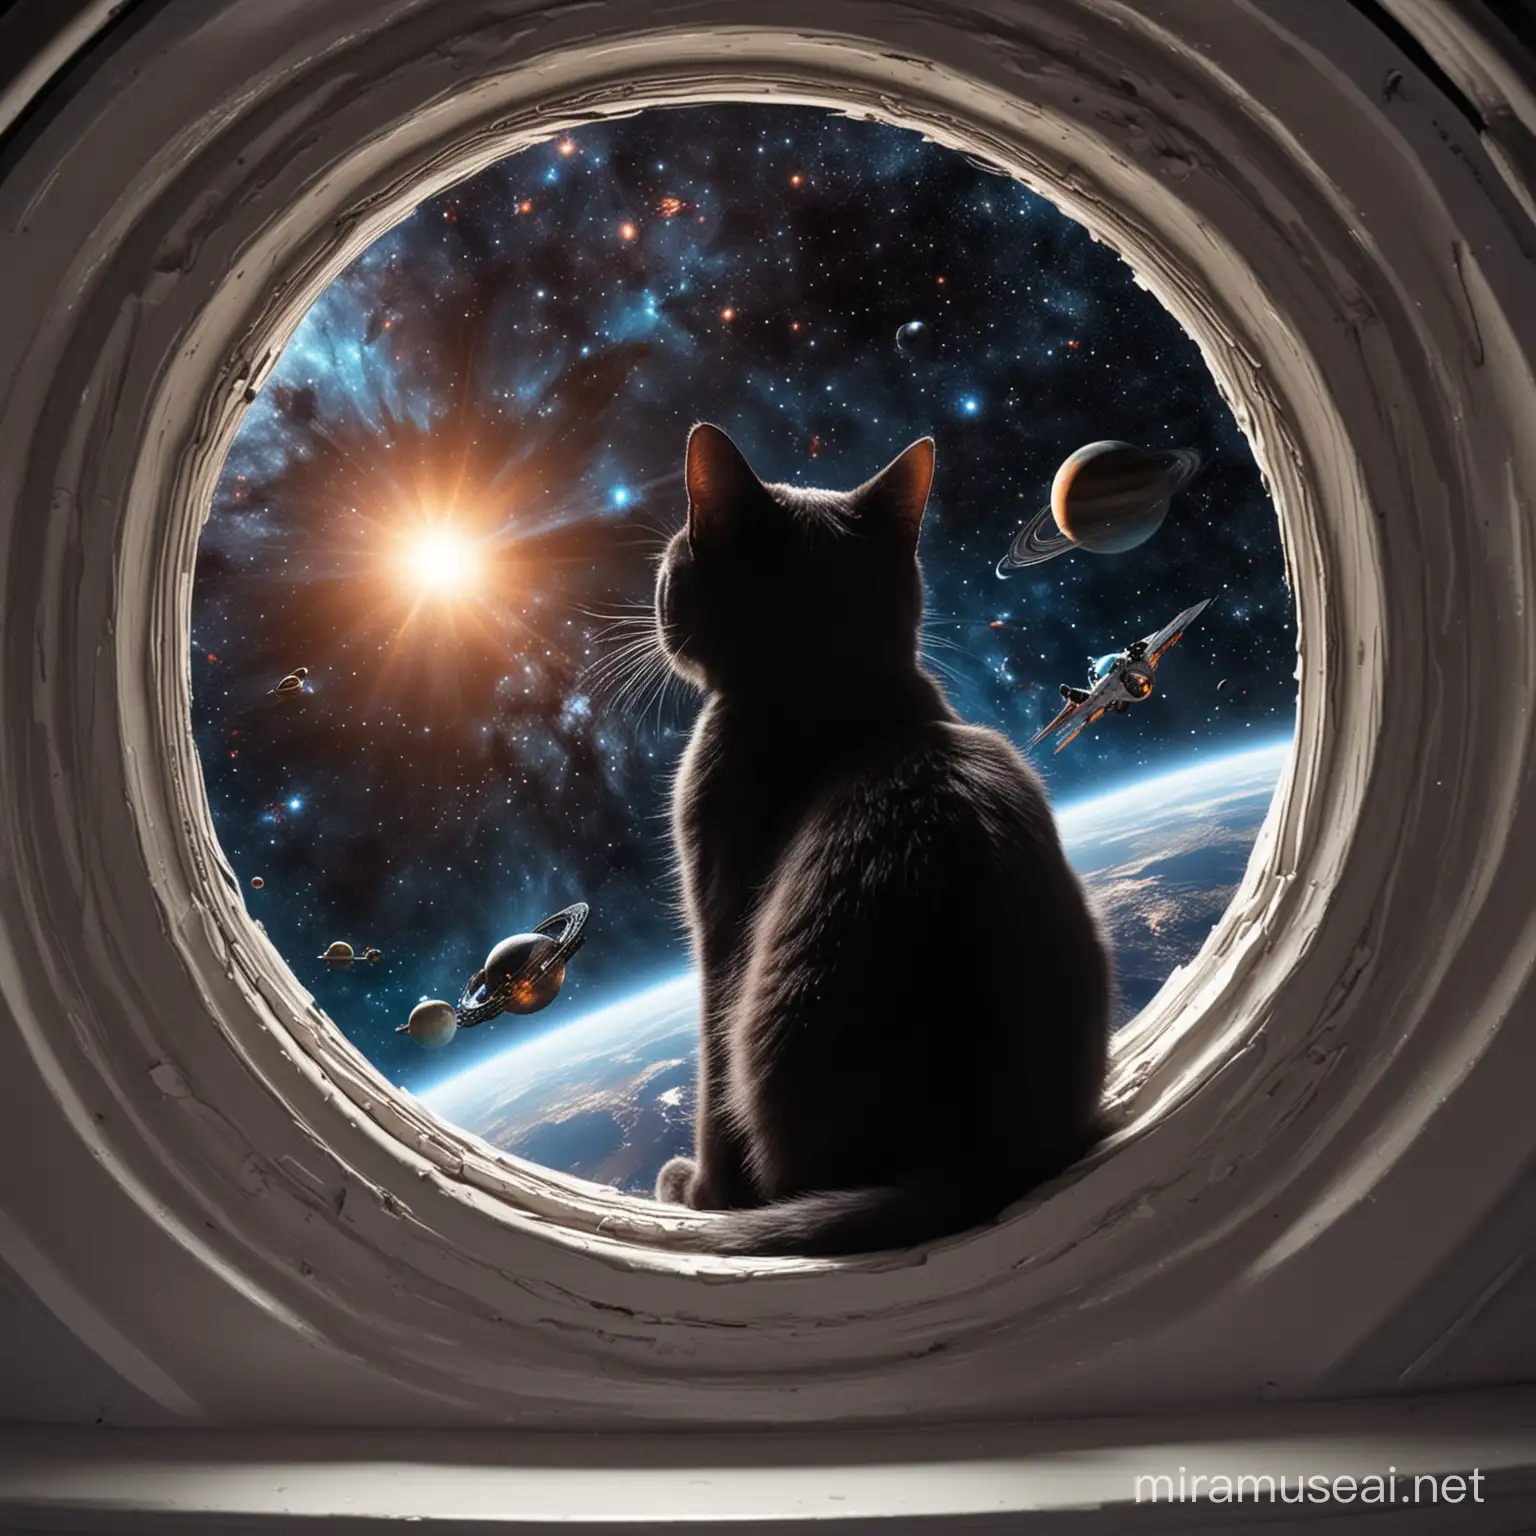 Curious Black Cat Observing Planets and Stars Through Spaceship Window